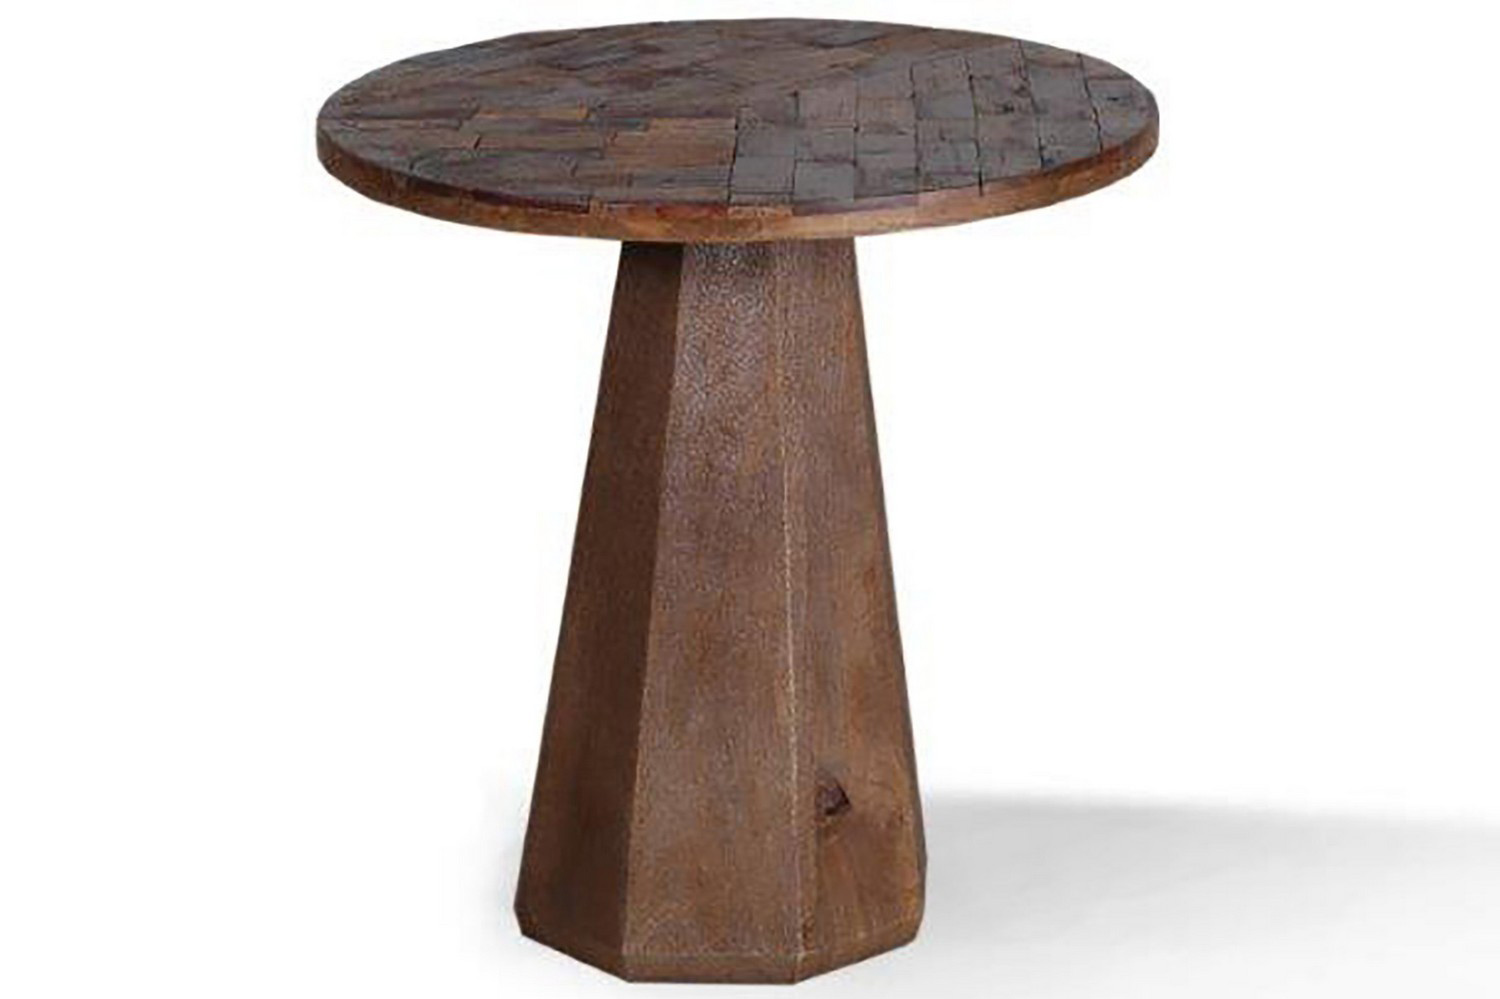 Parker House Crossings The Underground Round End Table - Reclaimed Rustic Brown